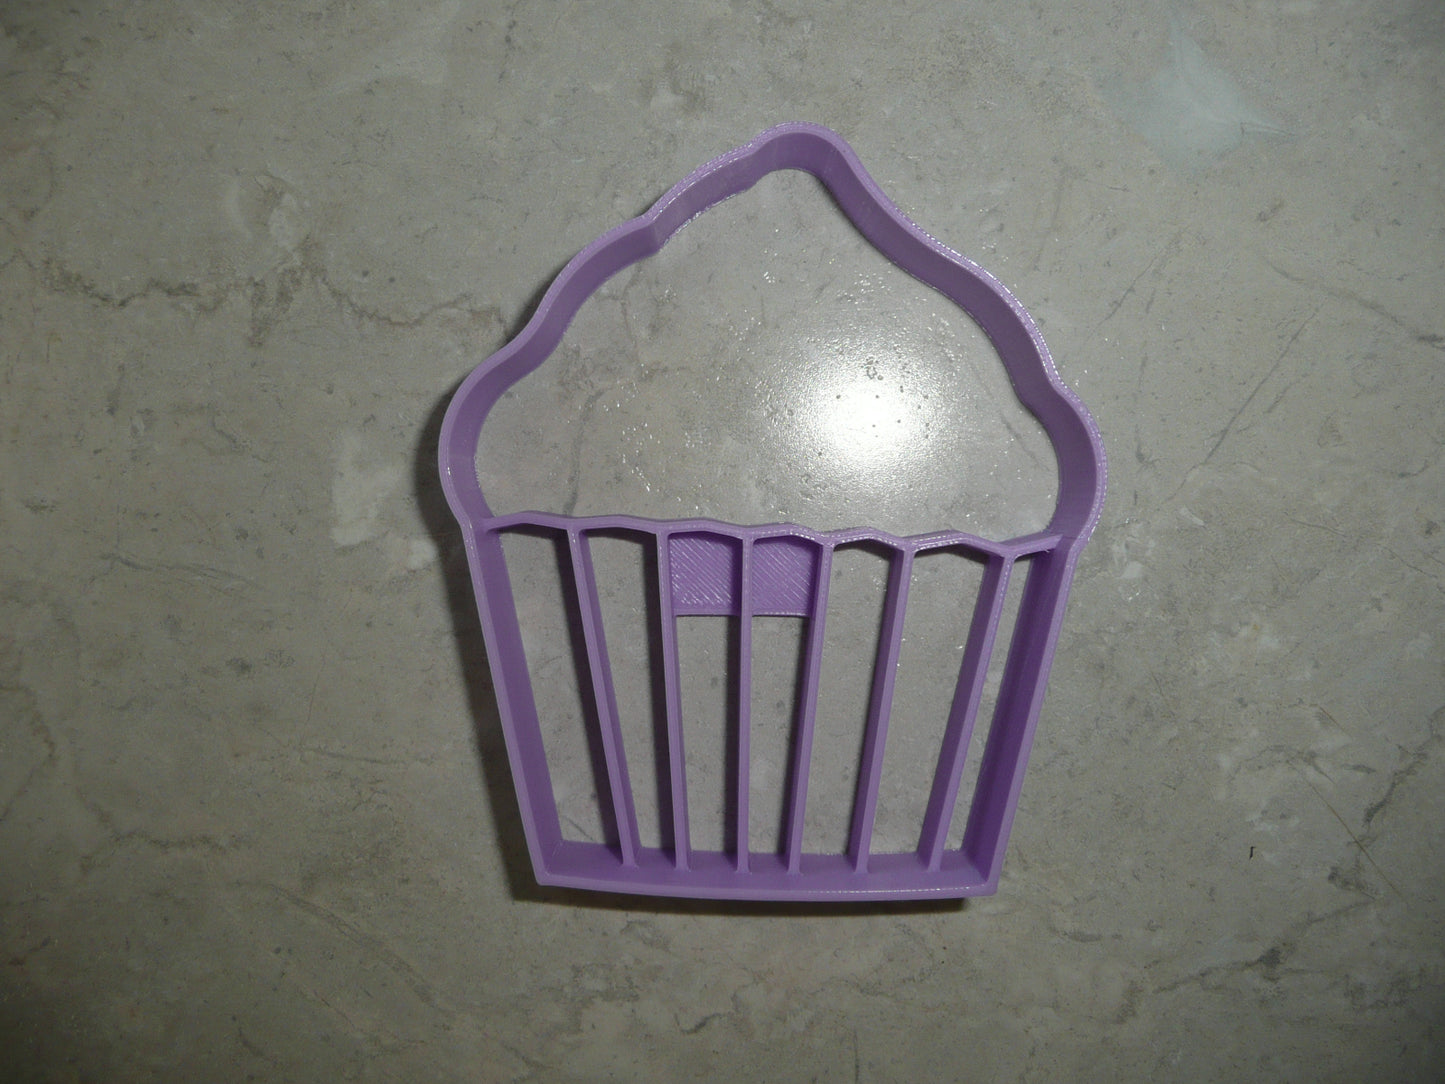 Cupcake Shape Birthday Party Theme Cookie Cutter Made In USA PR5128